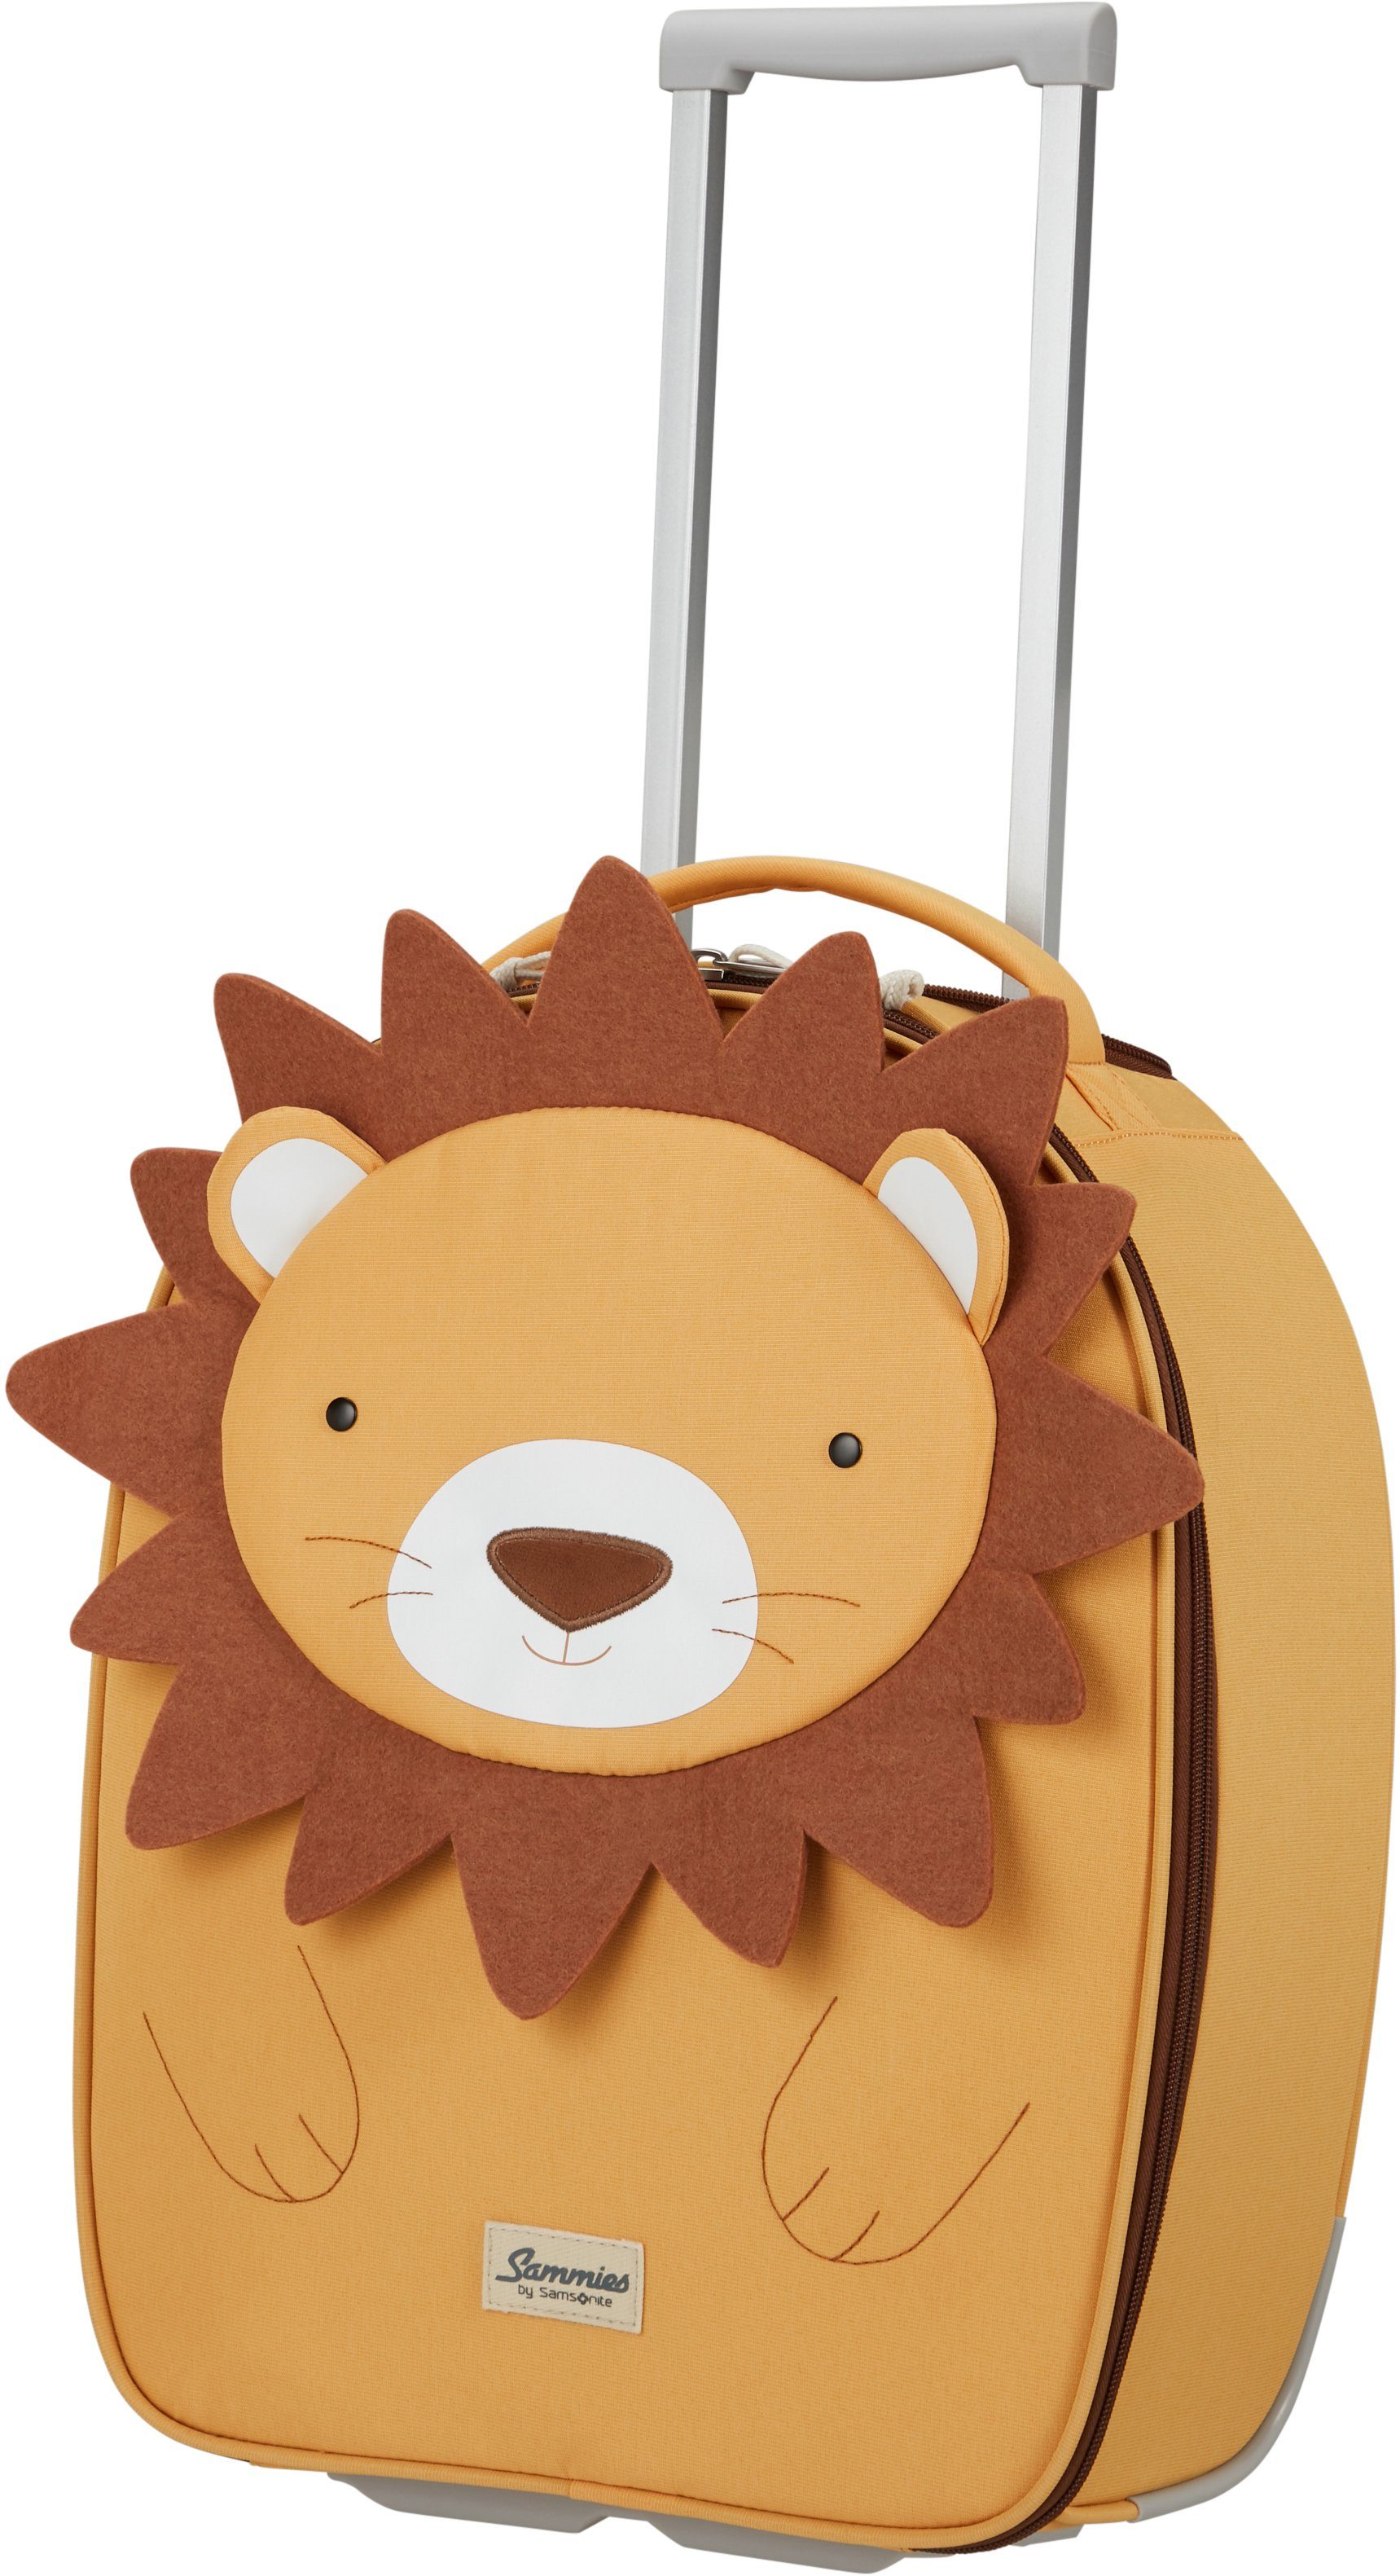 Samsonite Kinderkoffer Happy ECO, Material Lion Lester, recyceltem Rollen, Sammies 2 aus